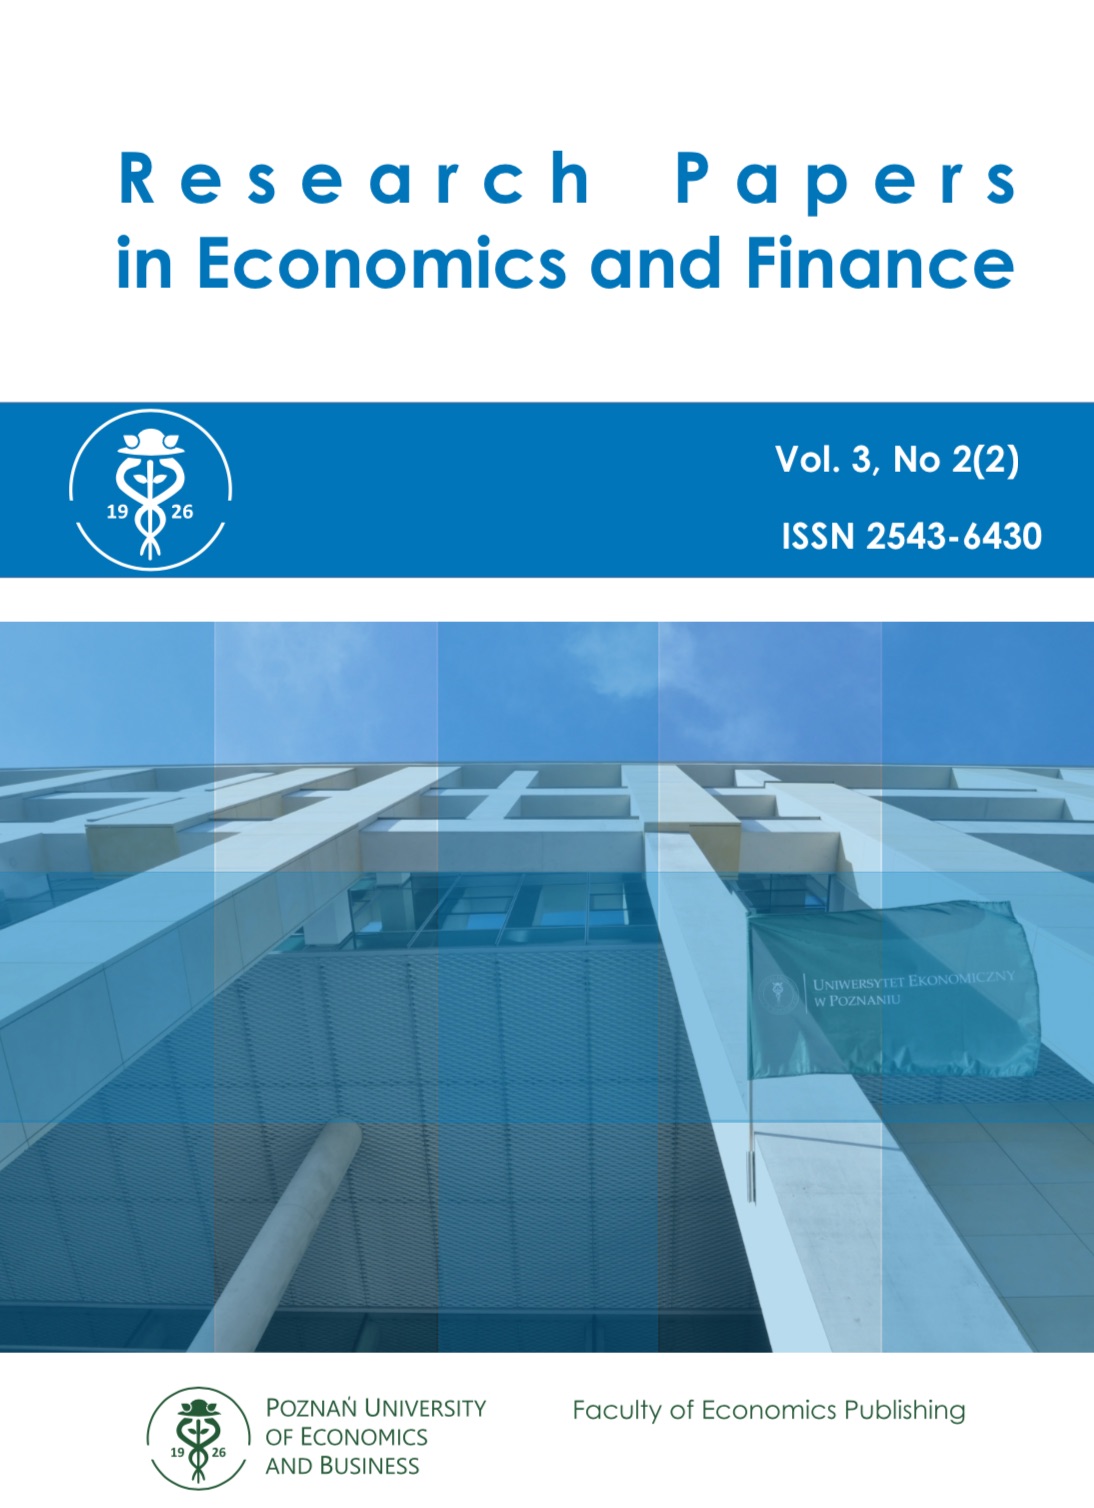 Research Papers in Economics and Finance, Vol. 3 No 2